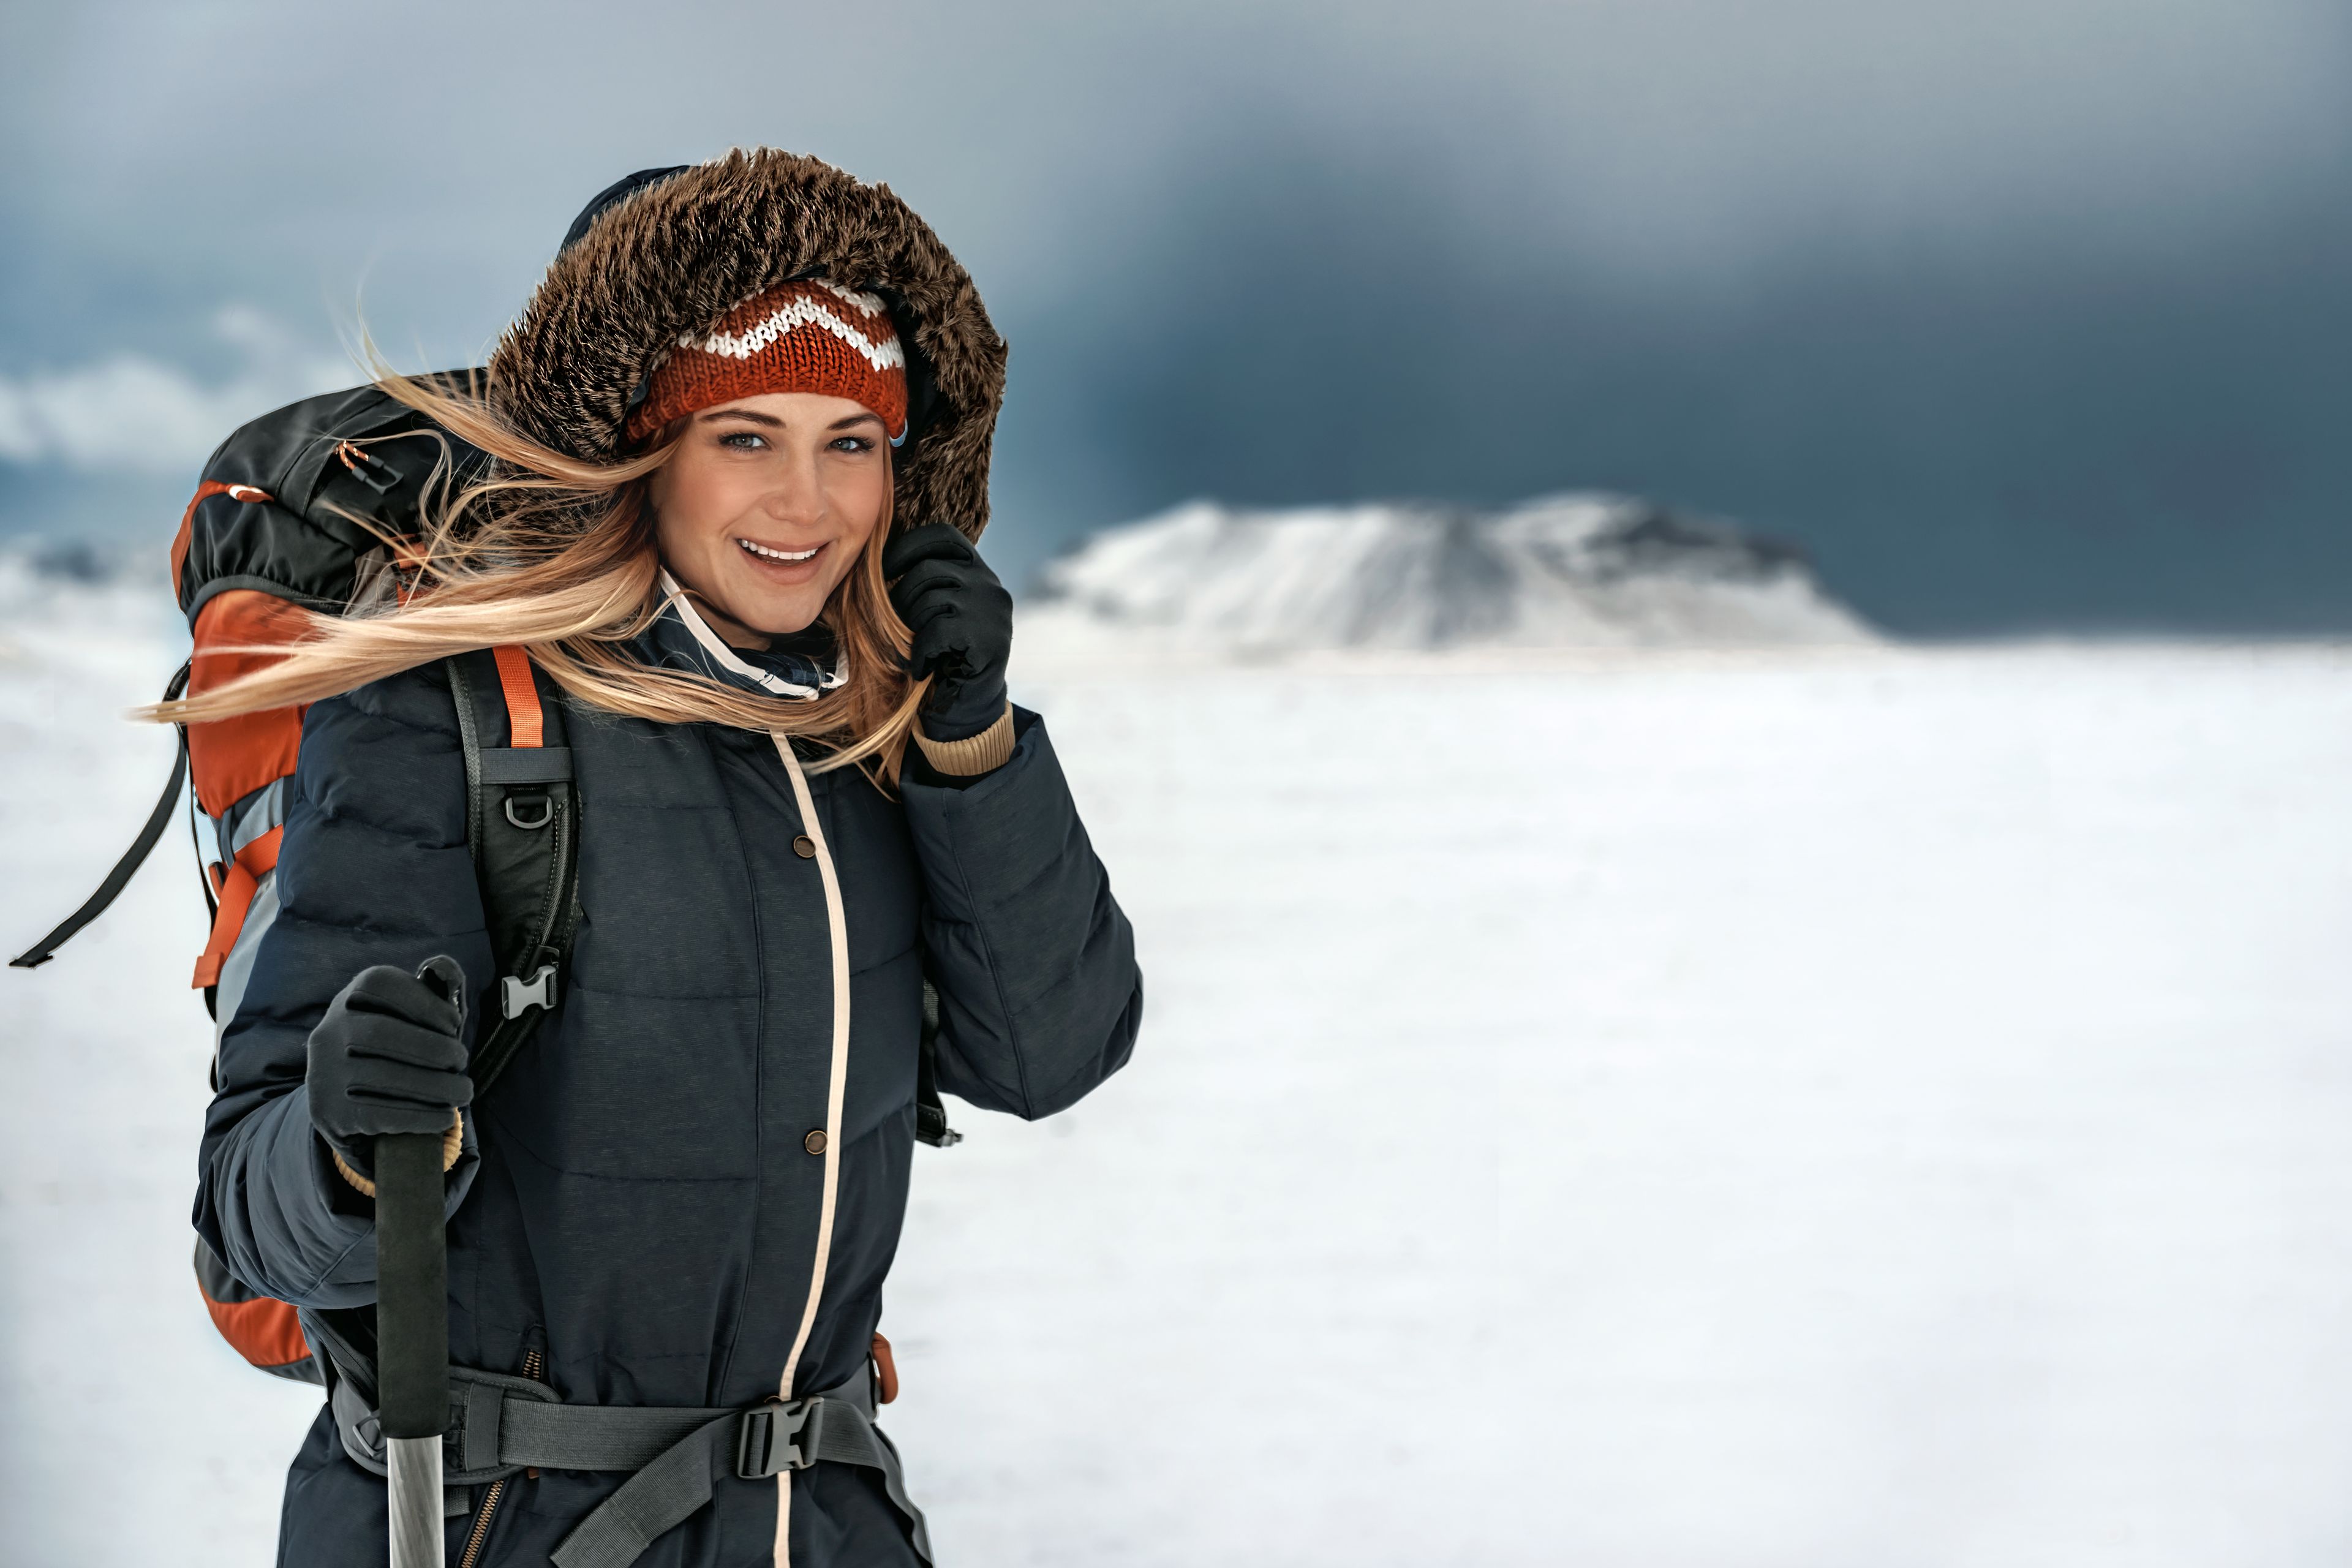 Pretty Woman on Winter Vacation: A Woman on Winter Vacation in Iceland